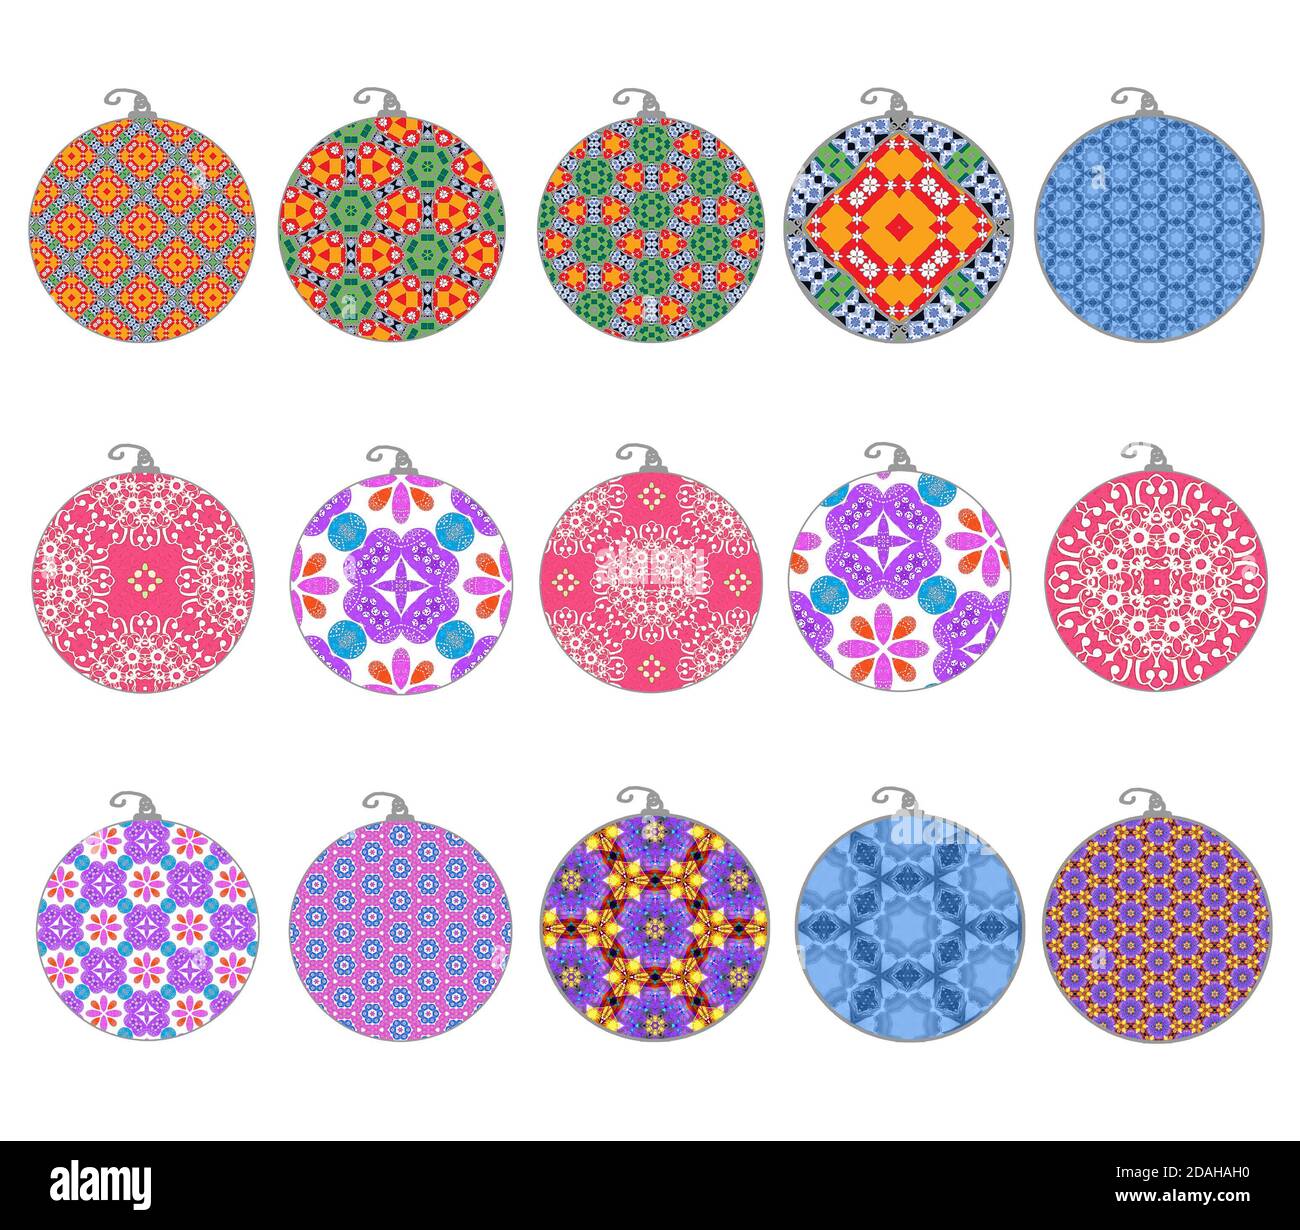 Collection of pretty Christmas ornaments isolated on white can be cut out for decorative holiday designs Stock Photo